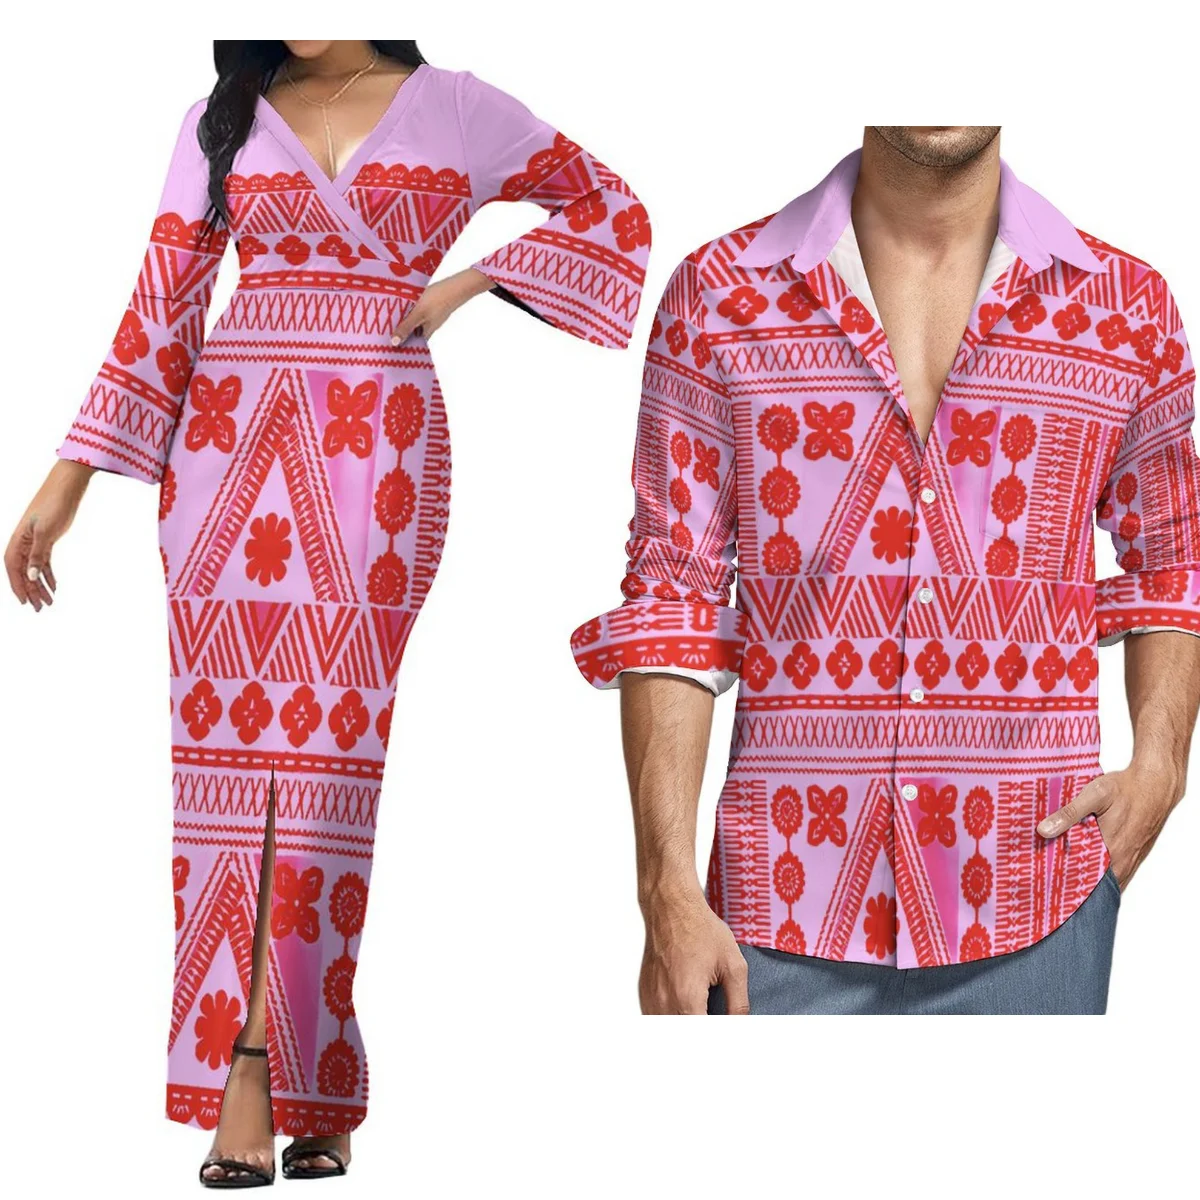 

Polynesian tribes design women's long-sleeved dresses with tight maxi dresses and men's long-sleeved shirts for couples